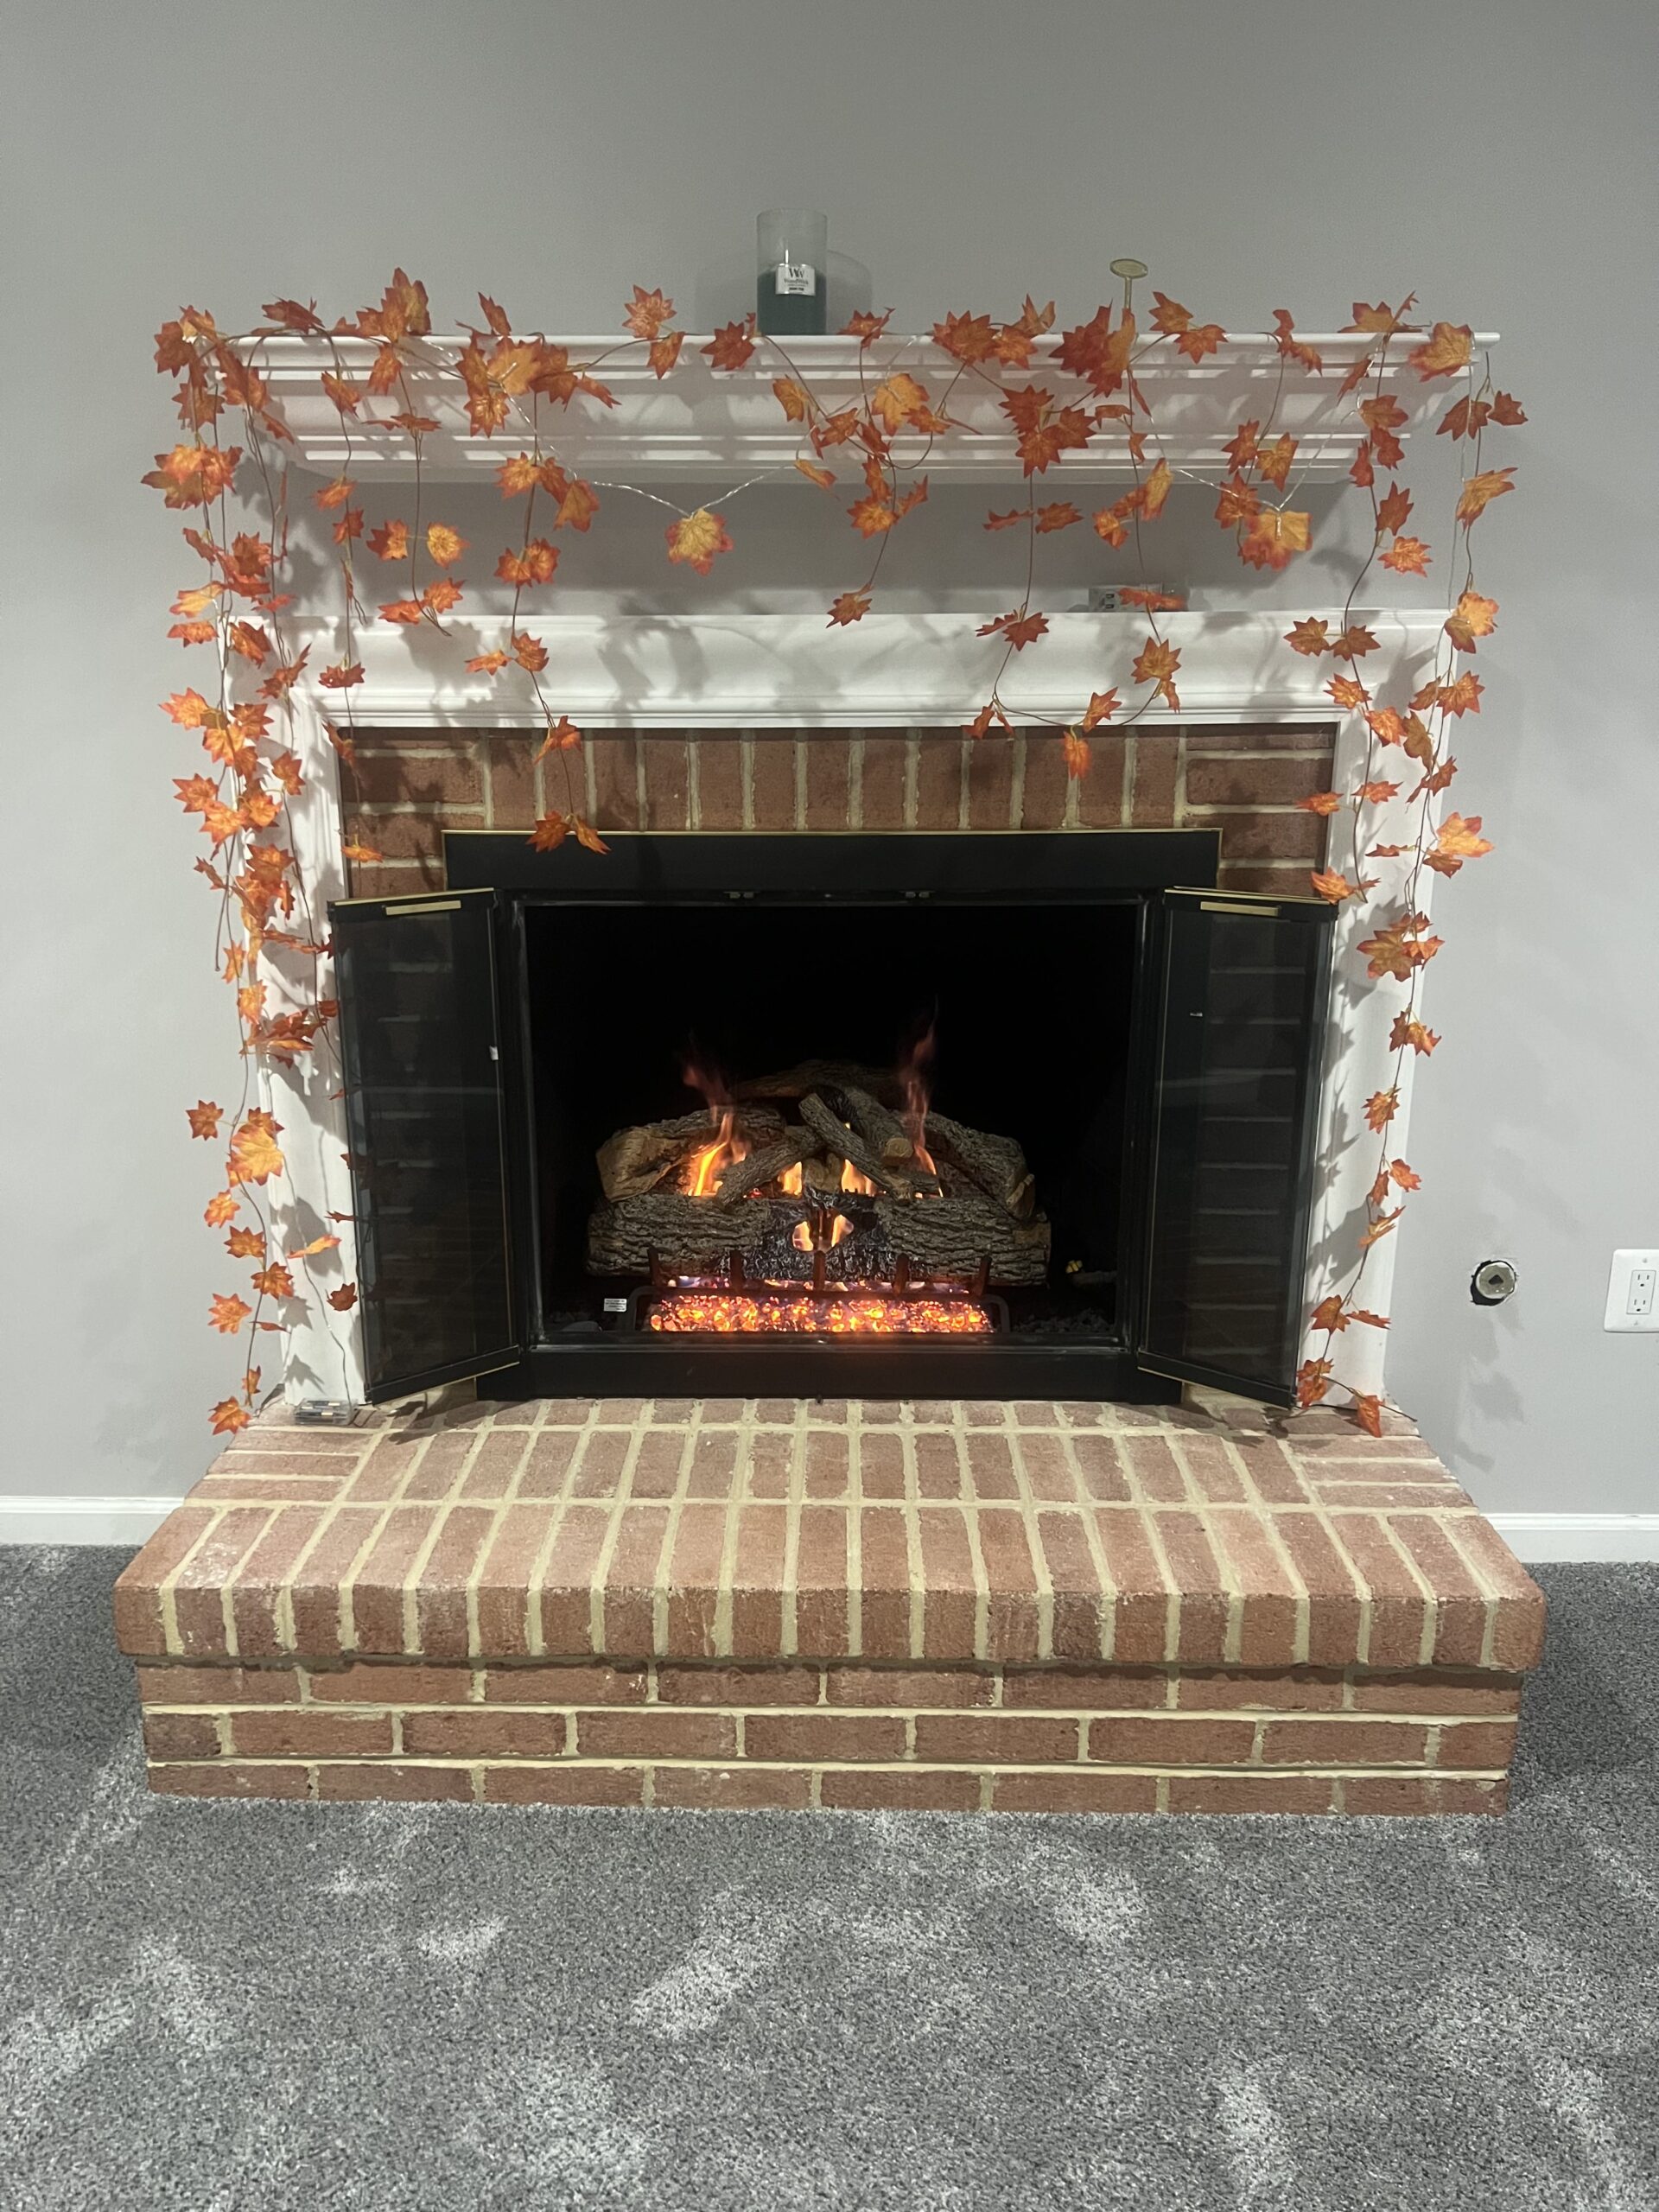 Gas fireplace log set with fall leaves around the mantel